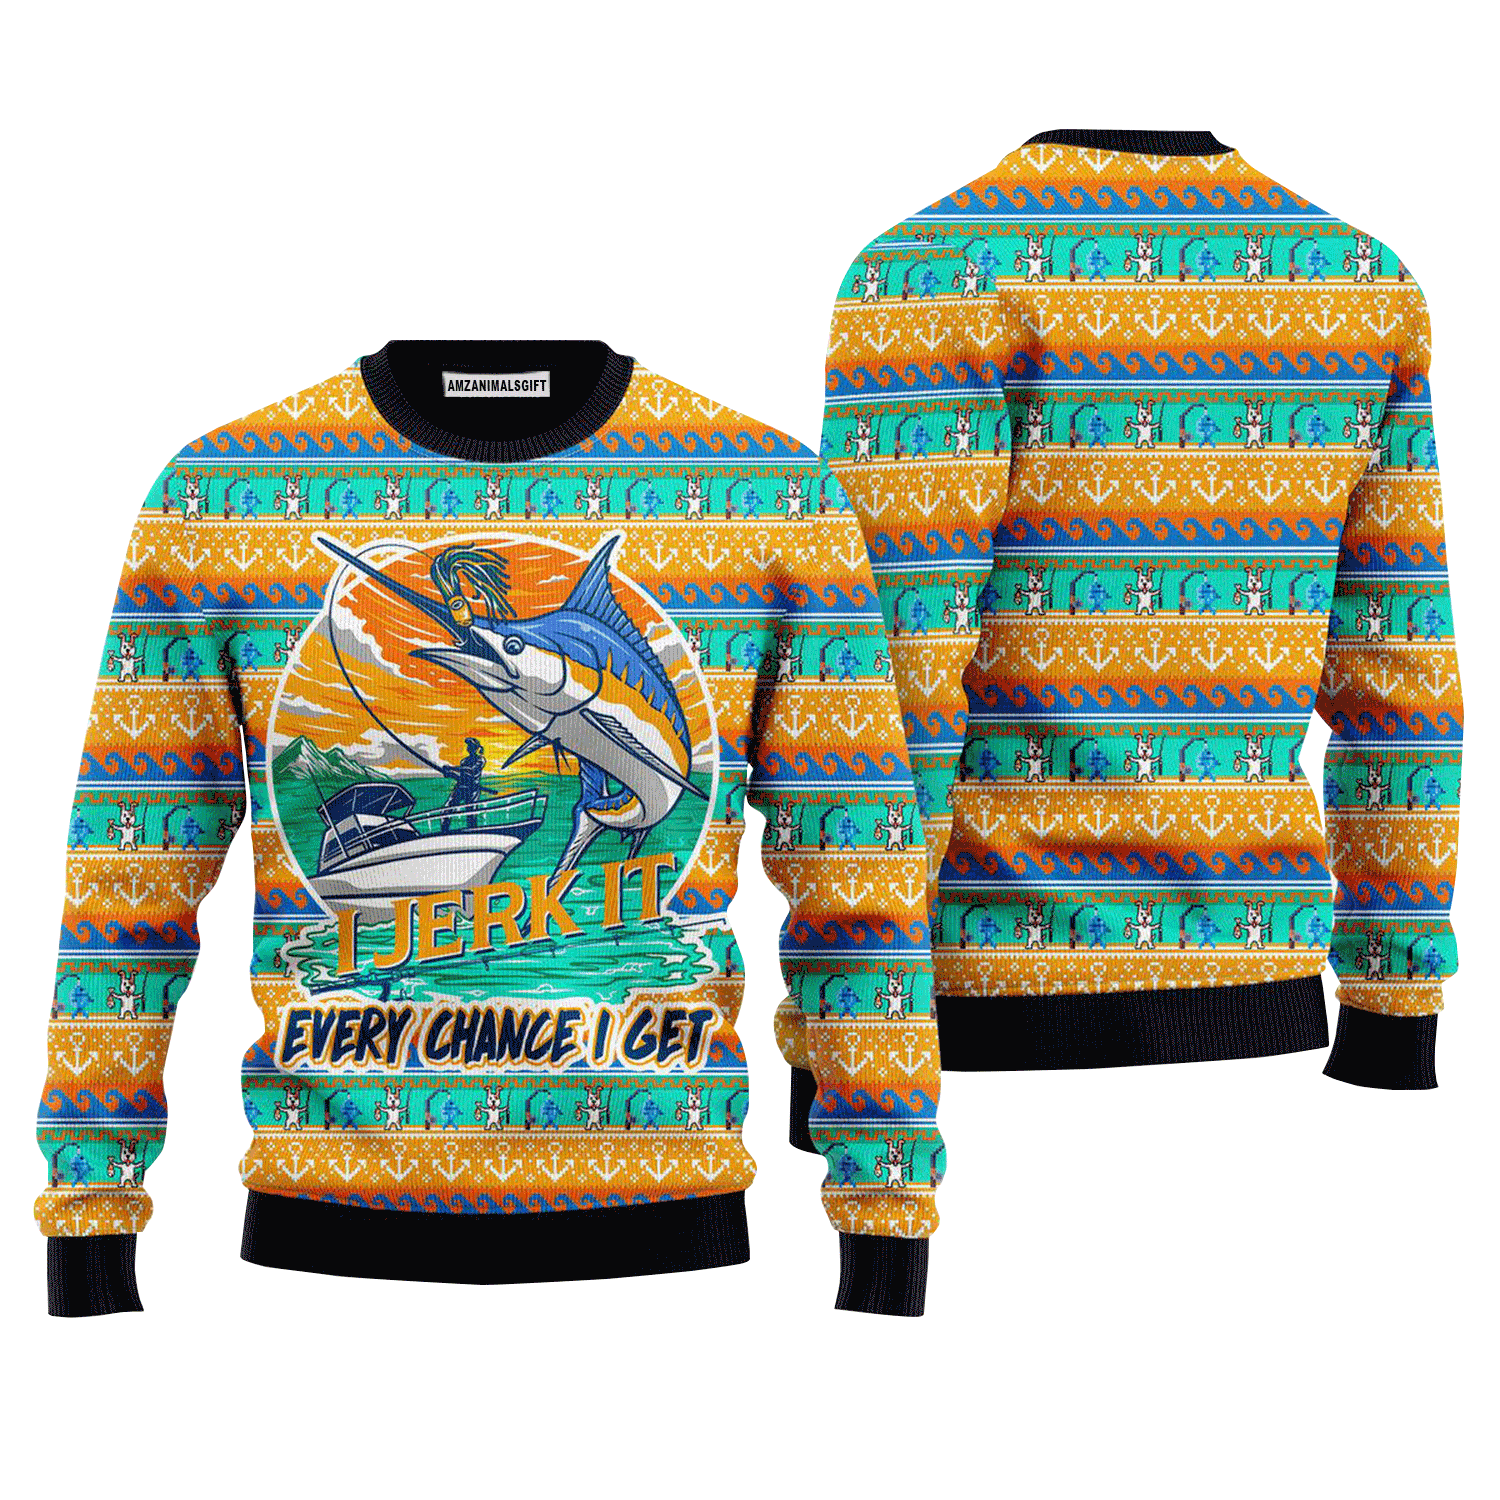 Fishing Sweater I Jerk It Every Change I Get, Ugly Sweater For Men & Women, Perfect Outfit For Christmas New Year Autumn Winter